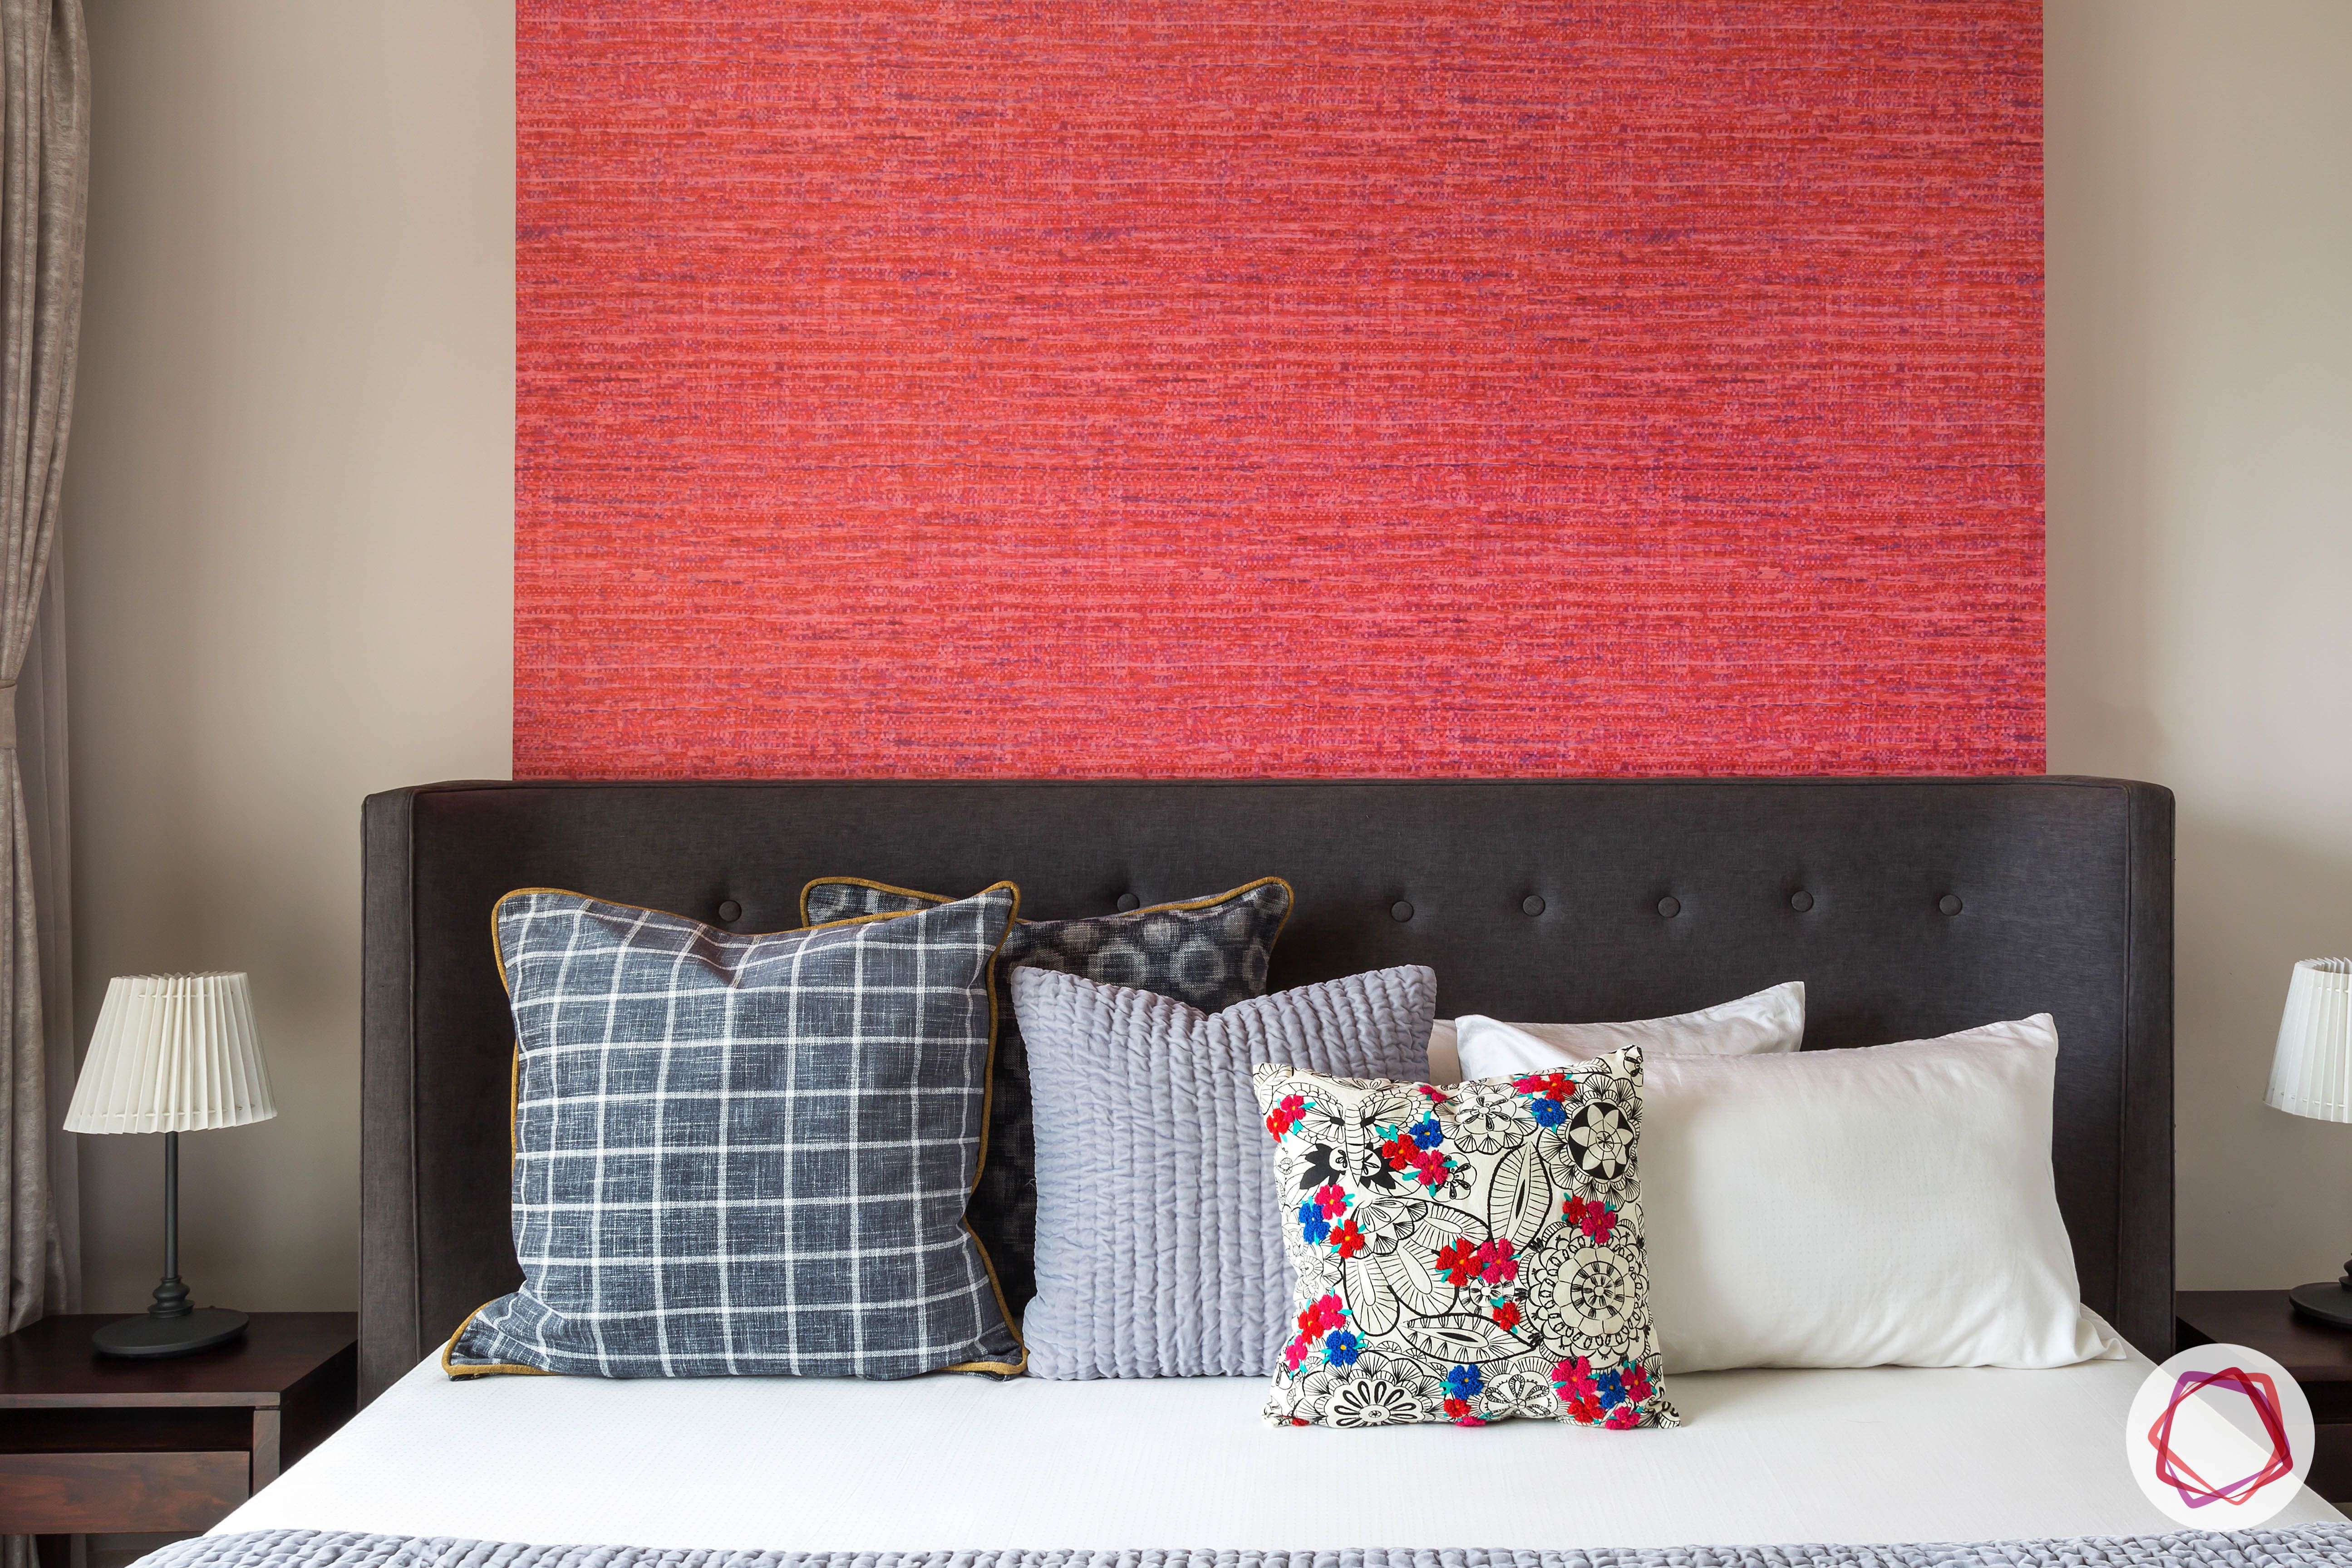 lodha group-red wall panel designs-grey headboard designs-headboard designs